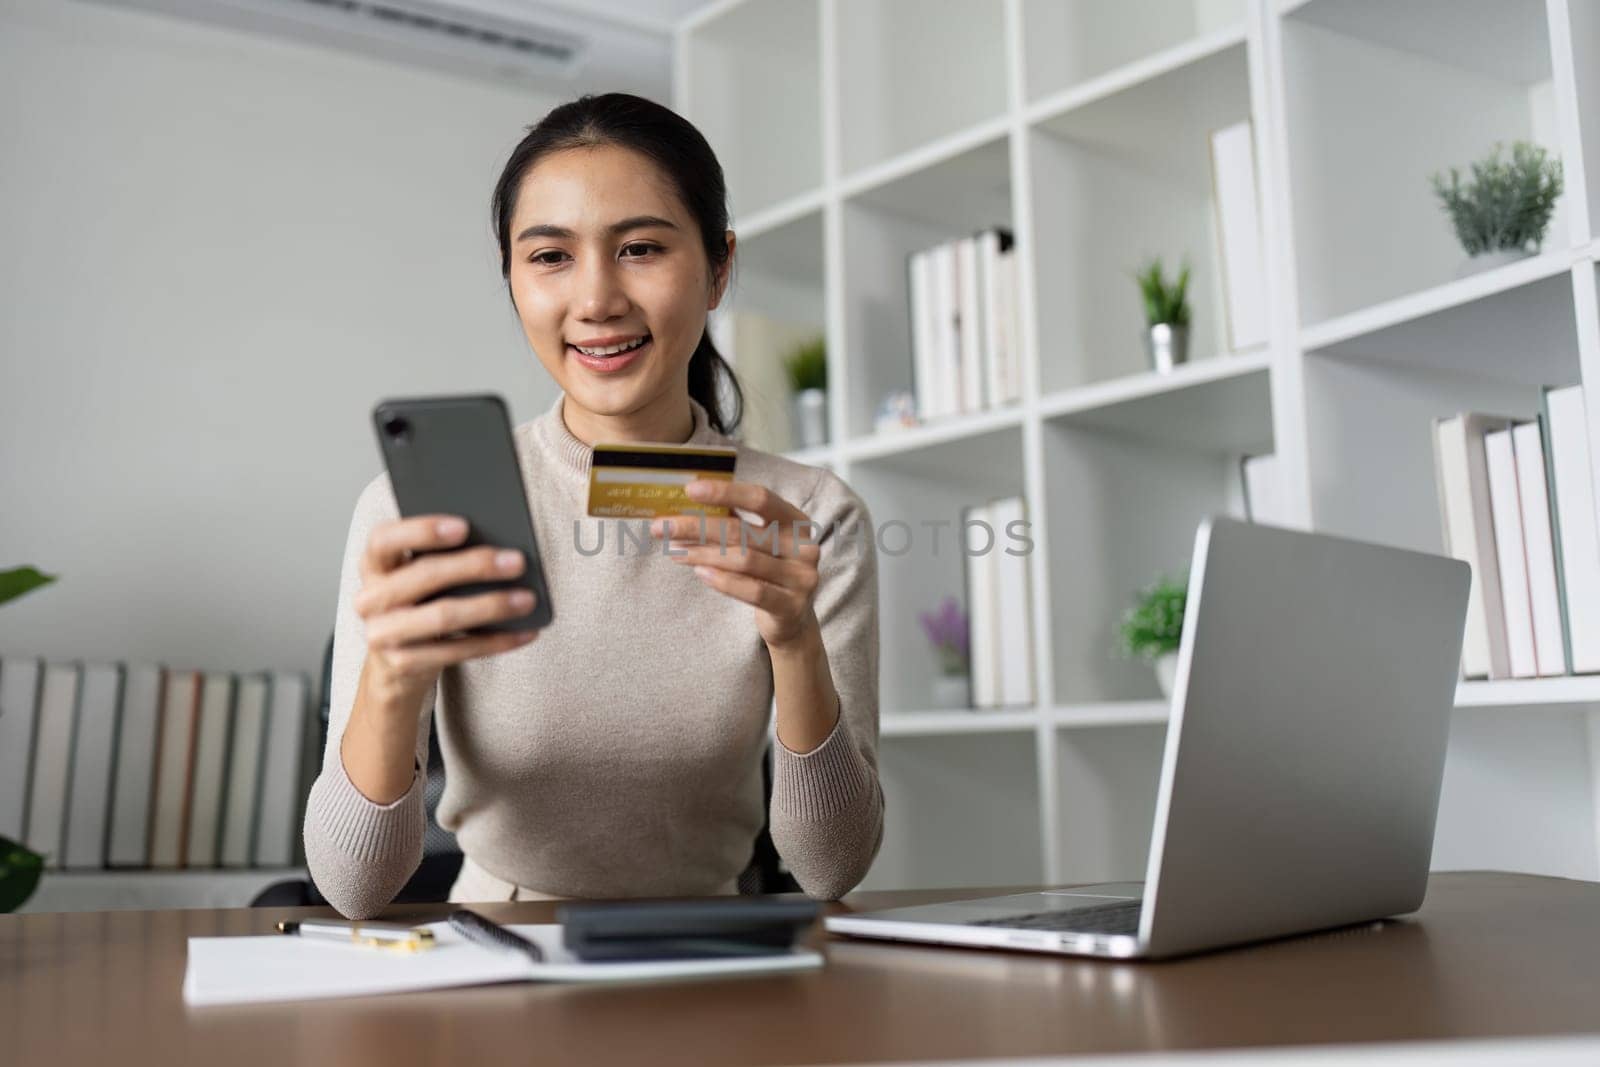 Woman using laptop computer and mobile phone holding credit card for shopping online by itchaznong